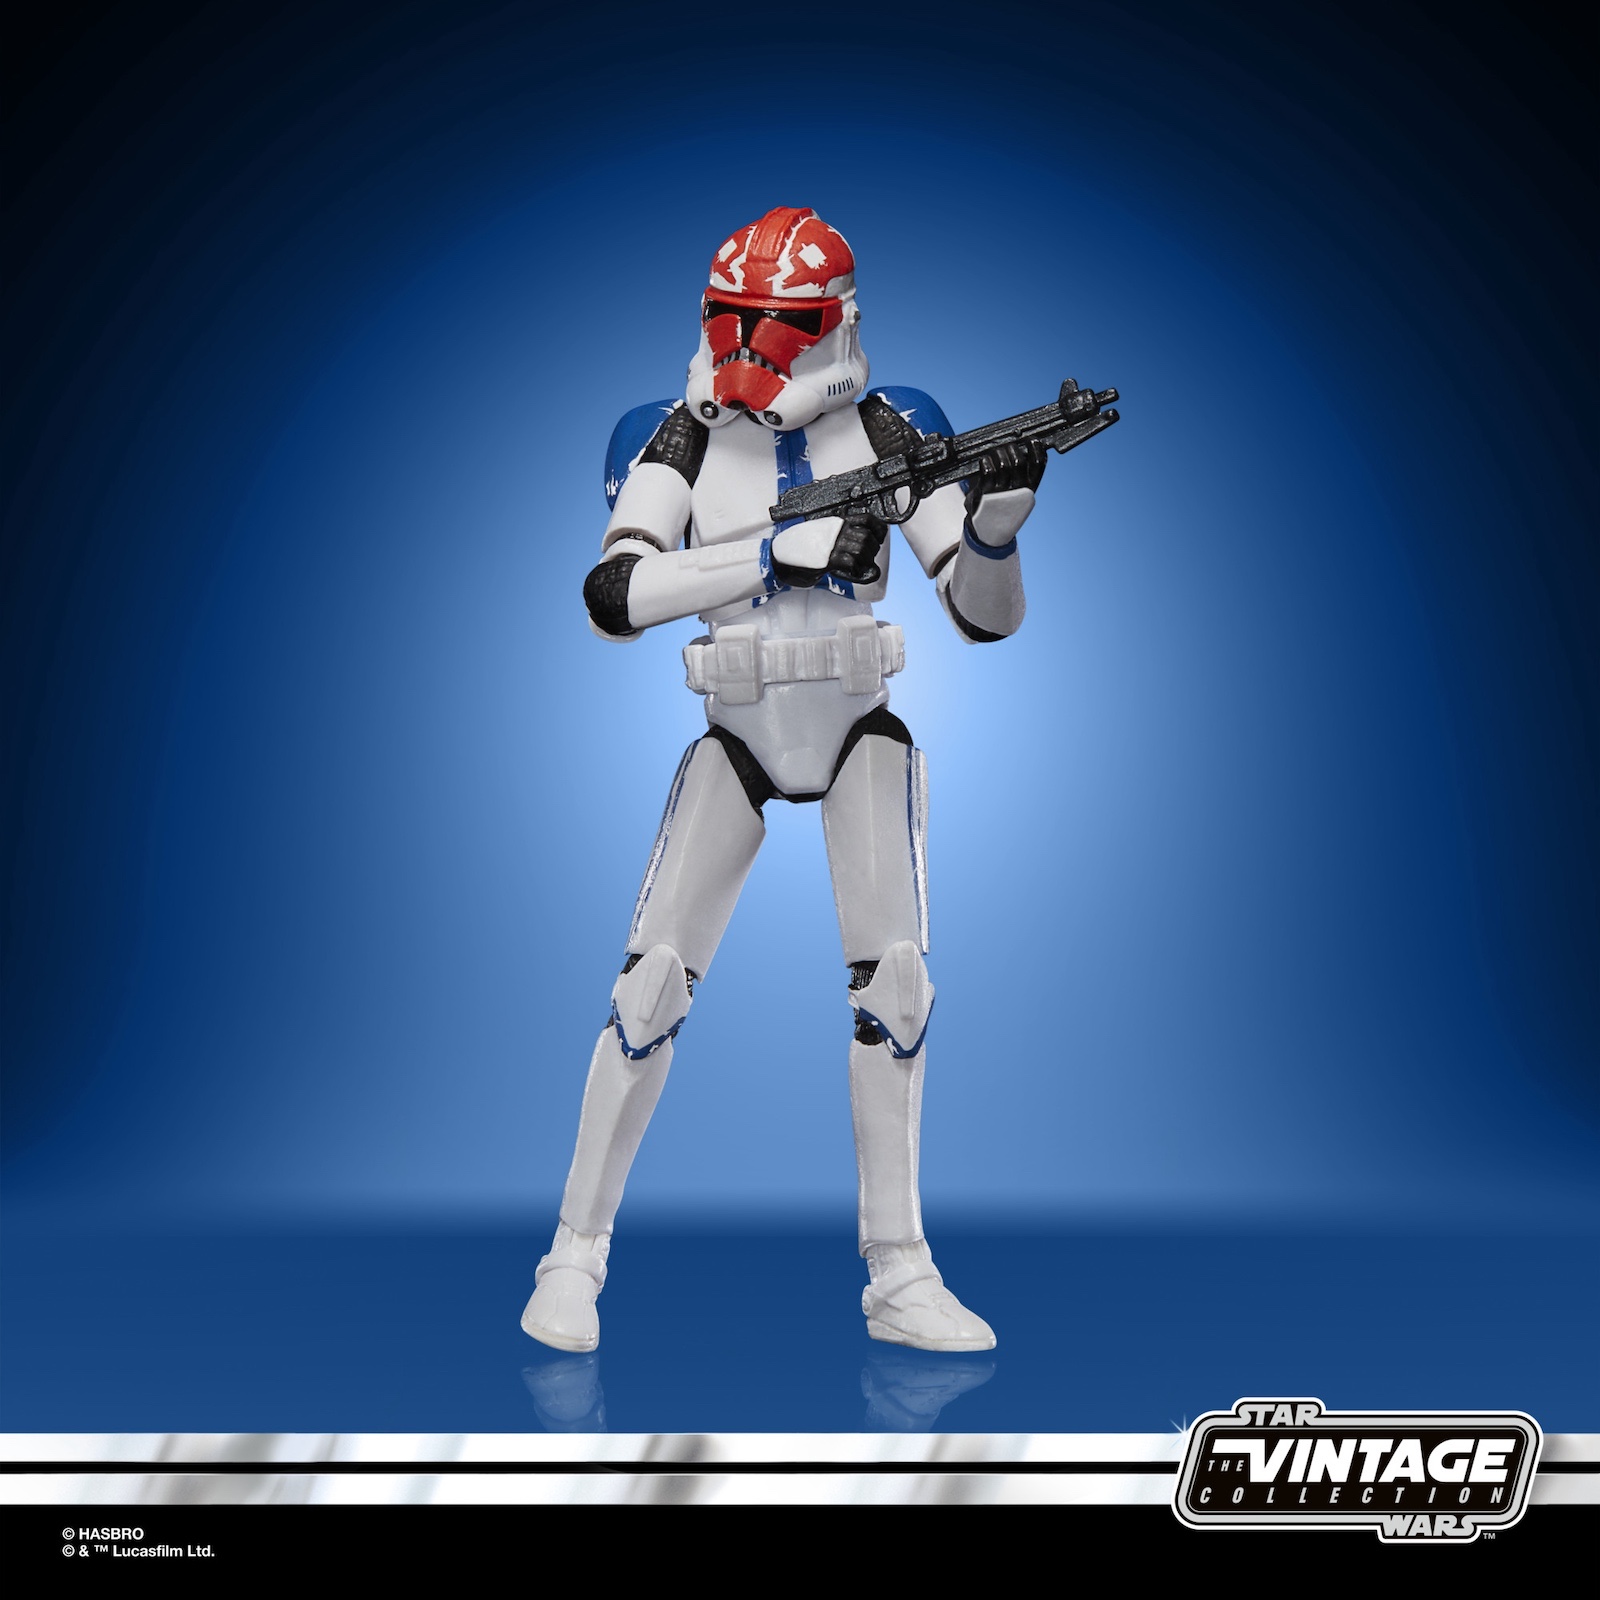 Star Wars: May the Fourth Star Wars Vintage Collection and Black Series reveals